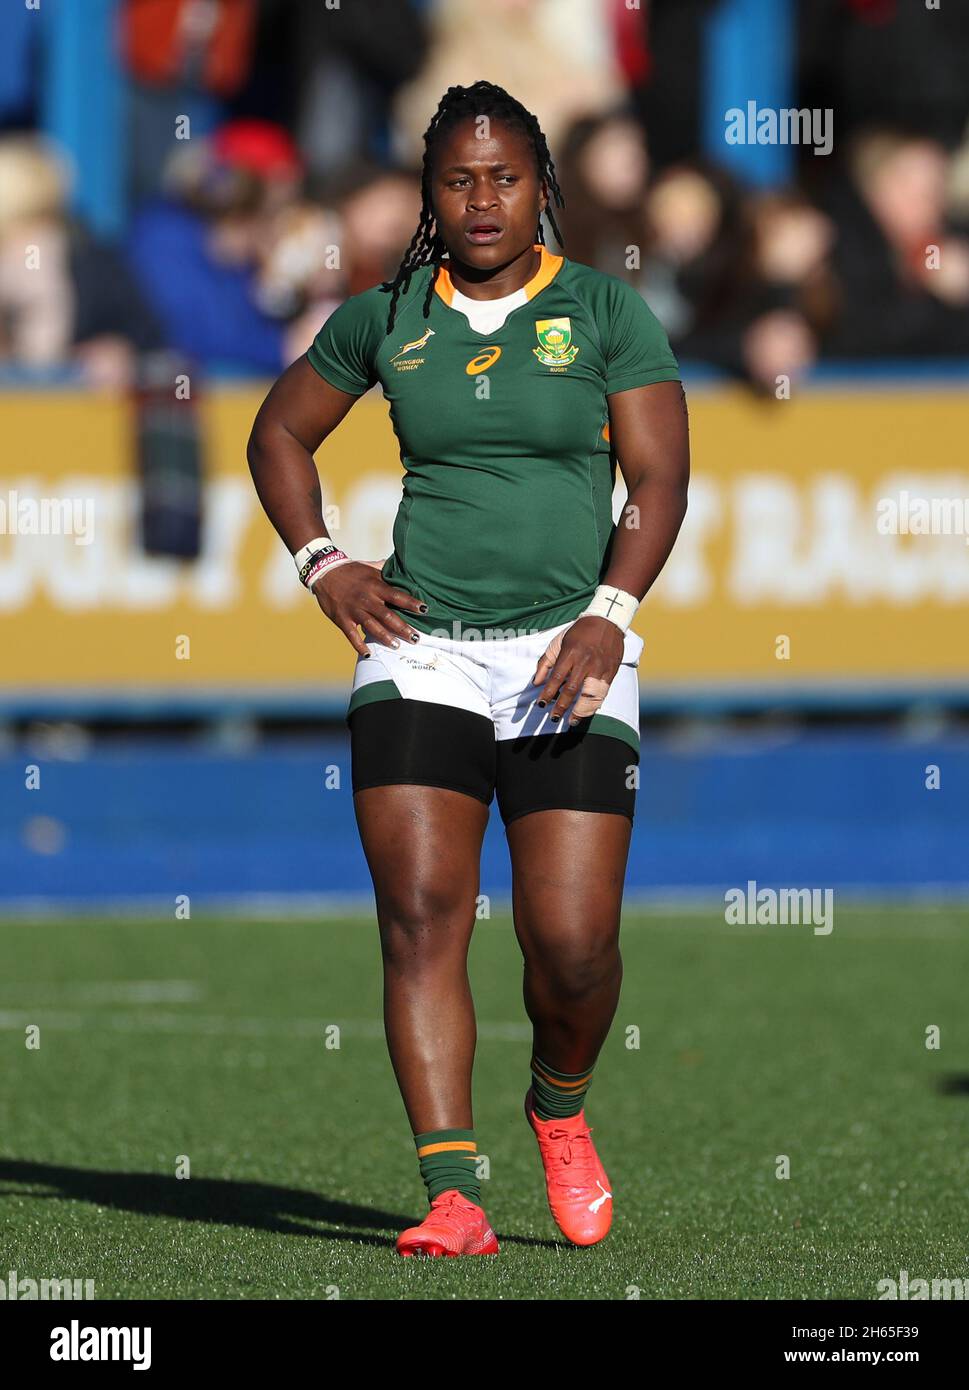 South Africa's Zintle Mpupha during the Autumn International match at Cardiff Arms park, Cardiff. Picture date: Saturday November 13, 2021. See PA story RUGBYU Wales Women. Photo credit should read: Bradley Collyer/PA Wire. RESTRICTIONS: Use subject to restrictions. Editorial use only, no commercial use without prior consent from rights holder. Stock Photo